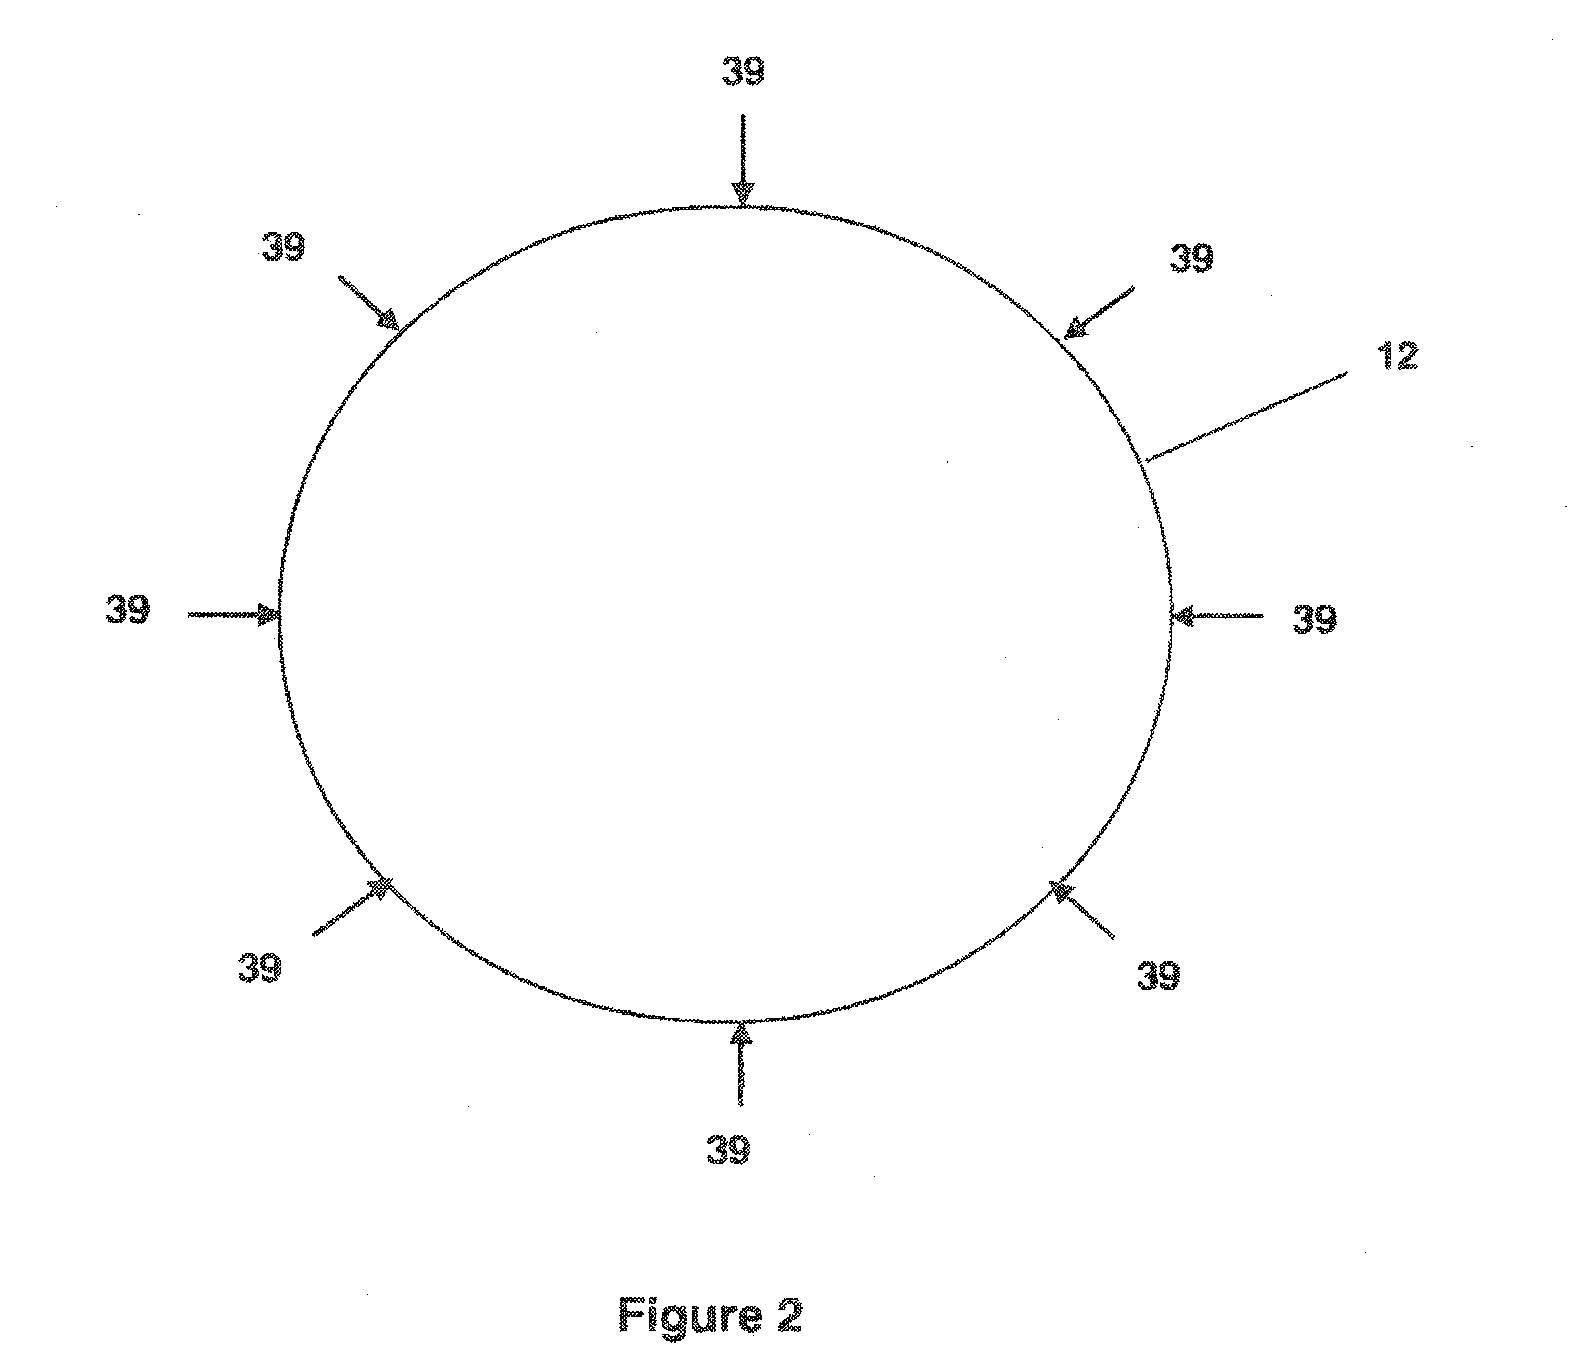 Method for Injecting a Feed Gas Stream into a Vertically Extended Column of Liquid